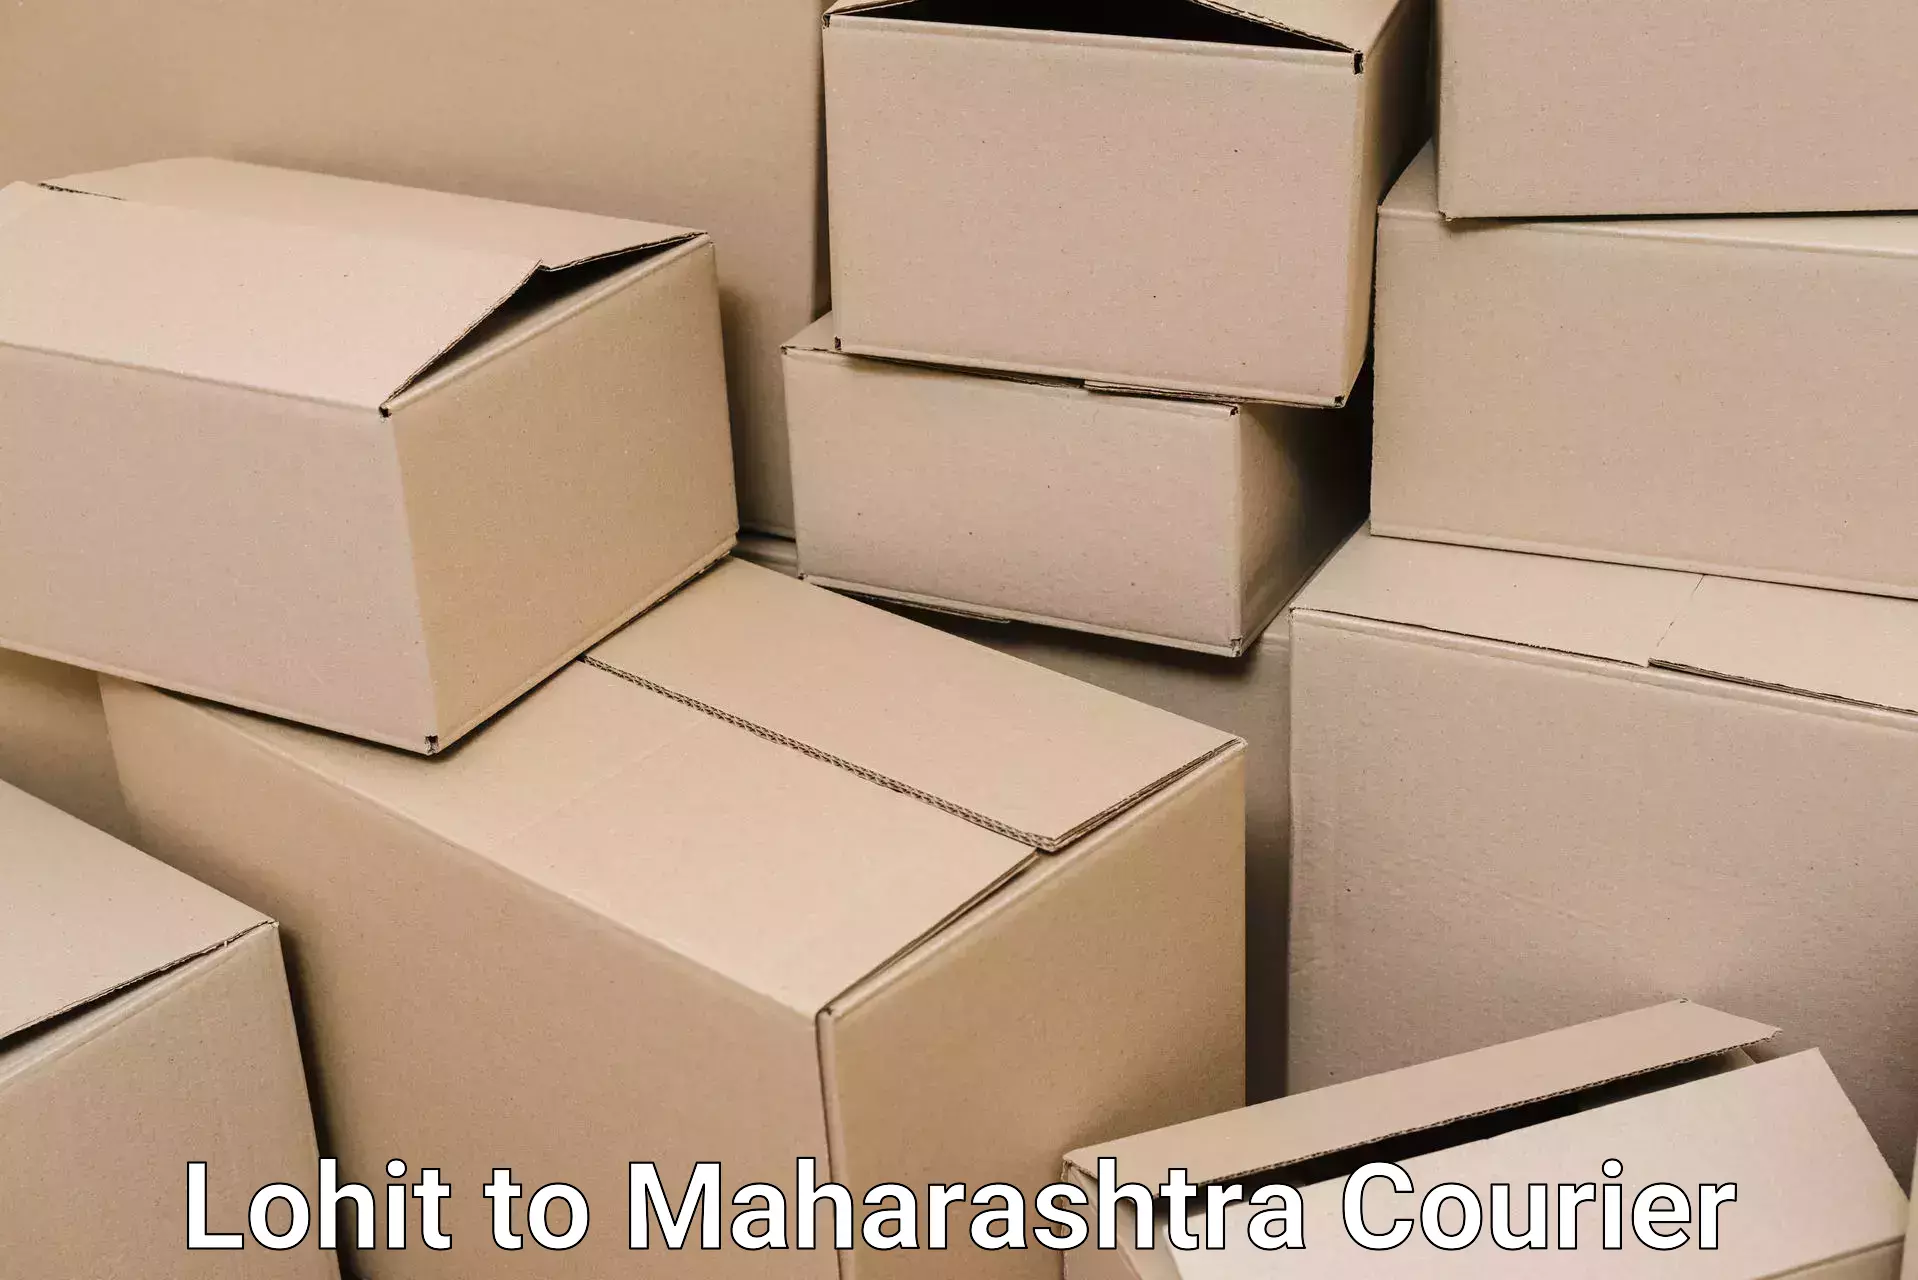 Specialized moving company Lohit to Andheri